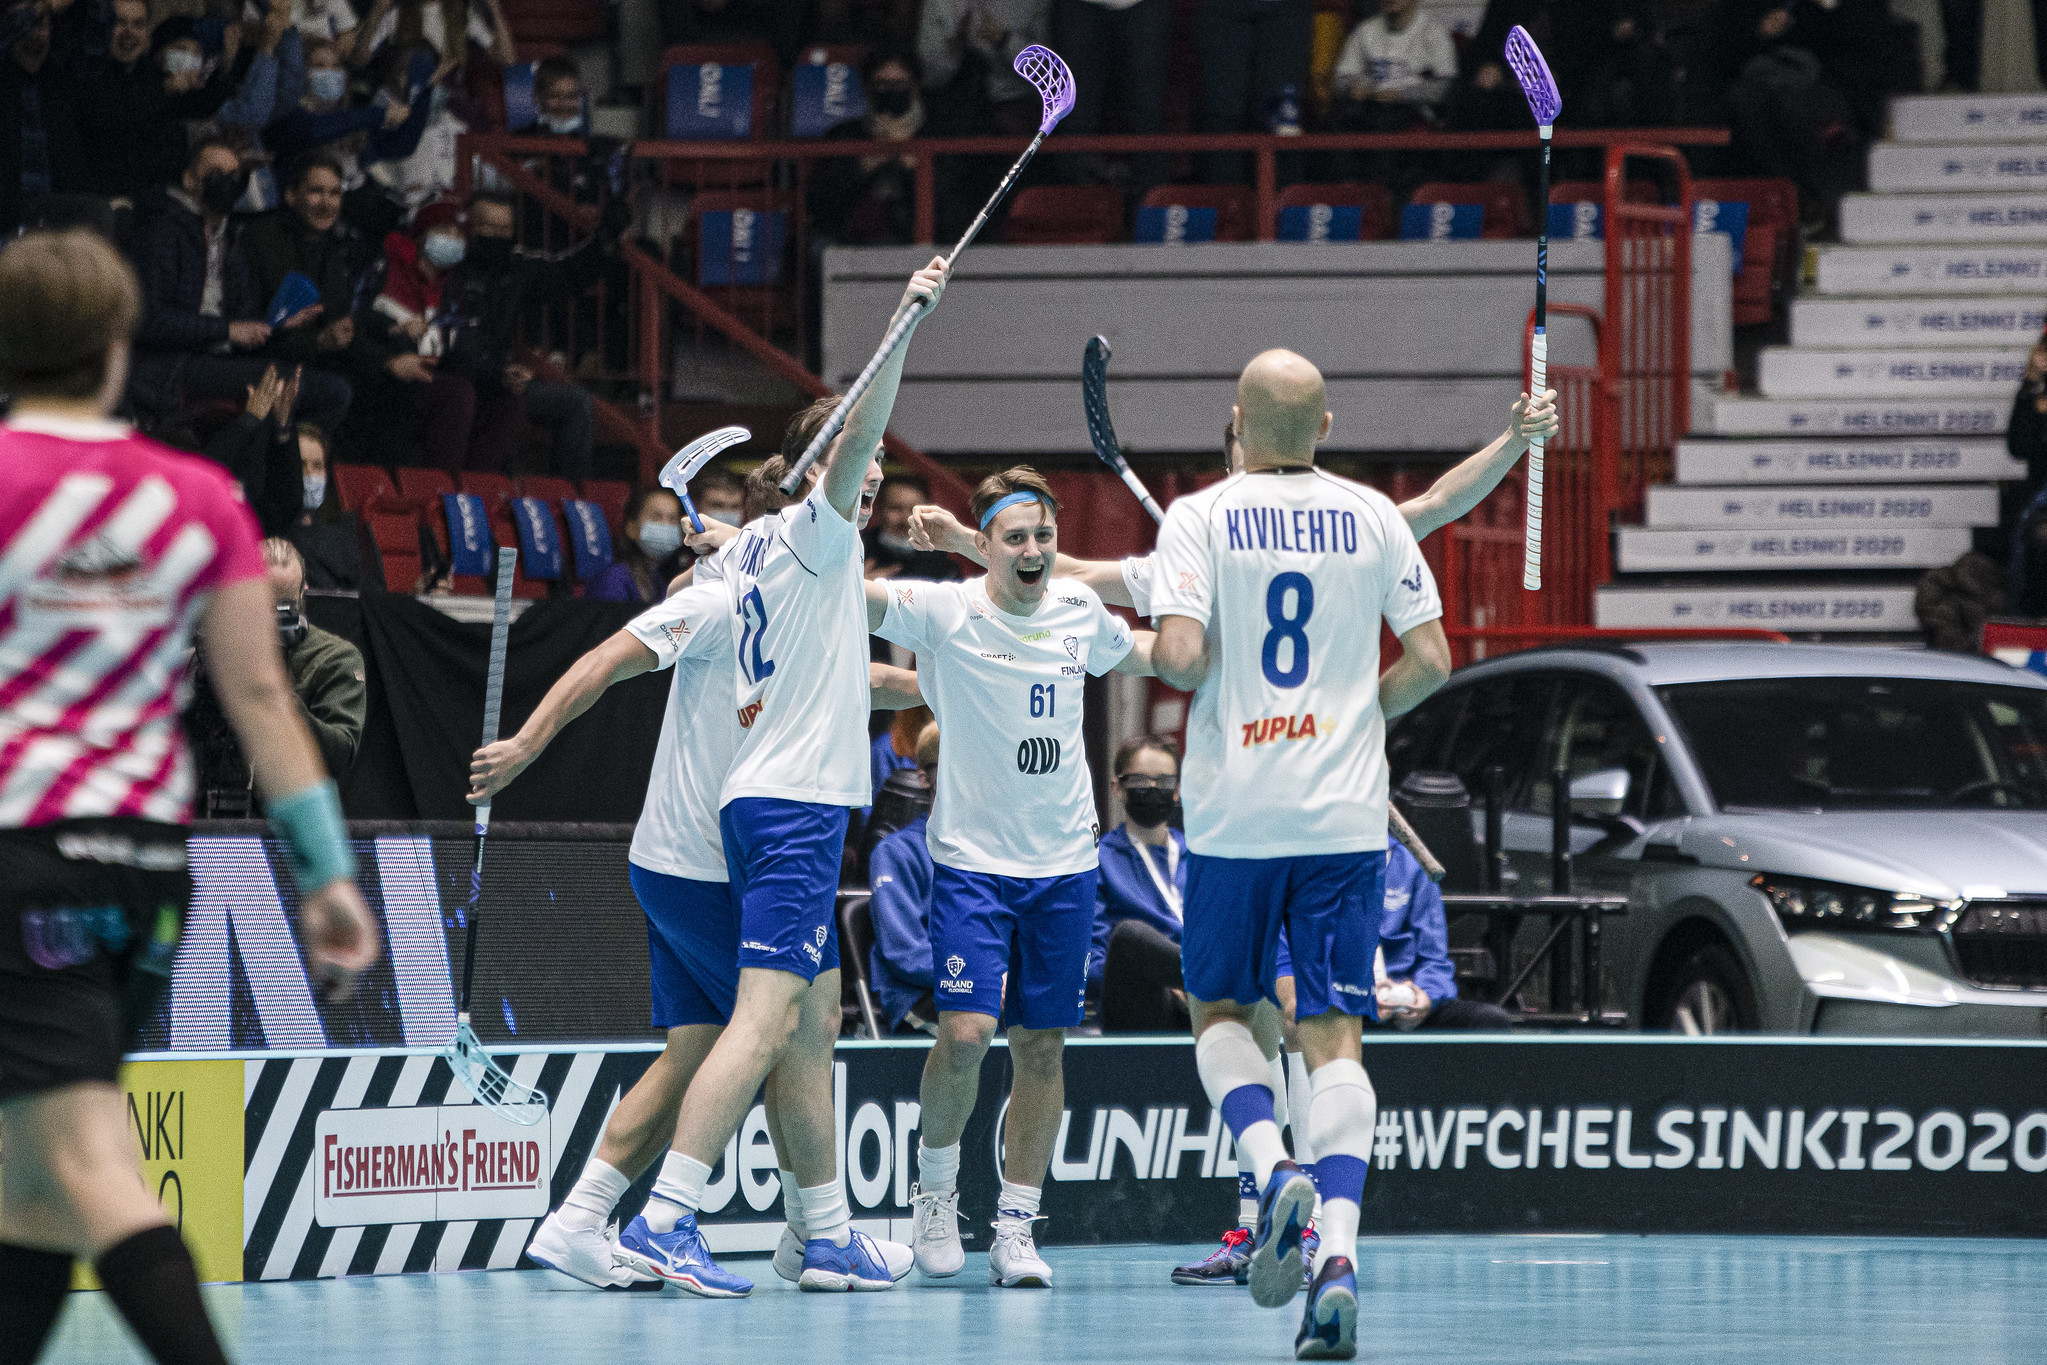 Finland beat rivals Sweden in group stage at Mens World Floorball Championship